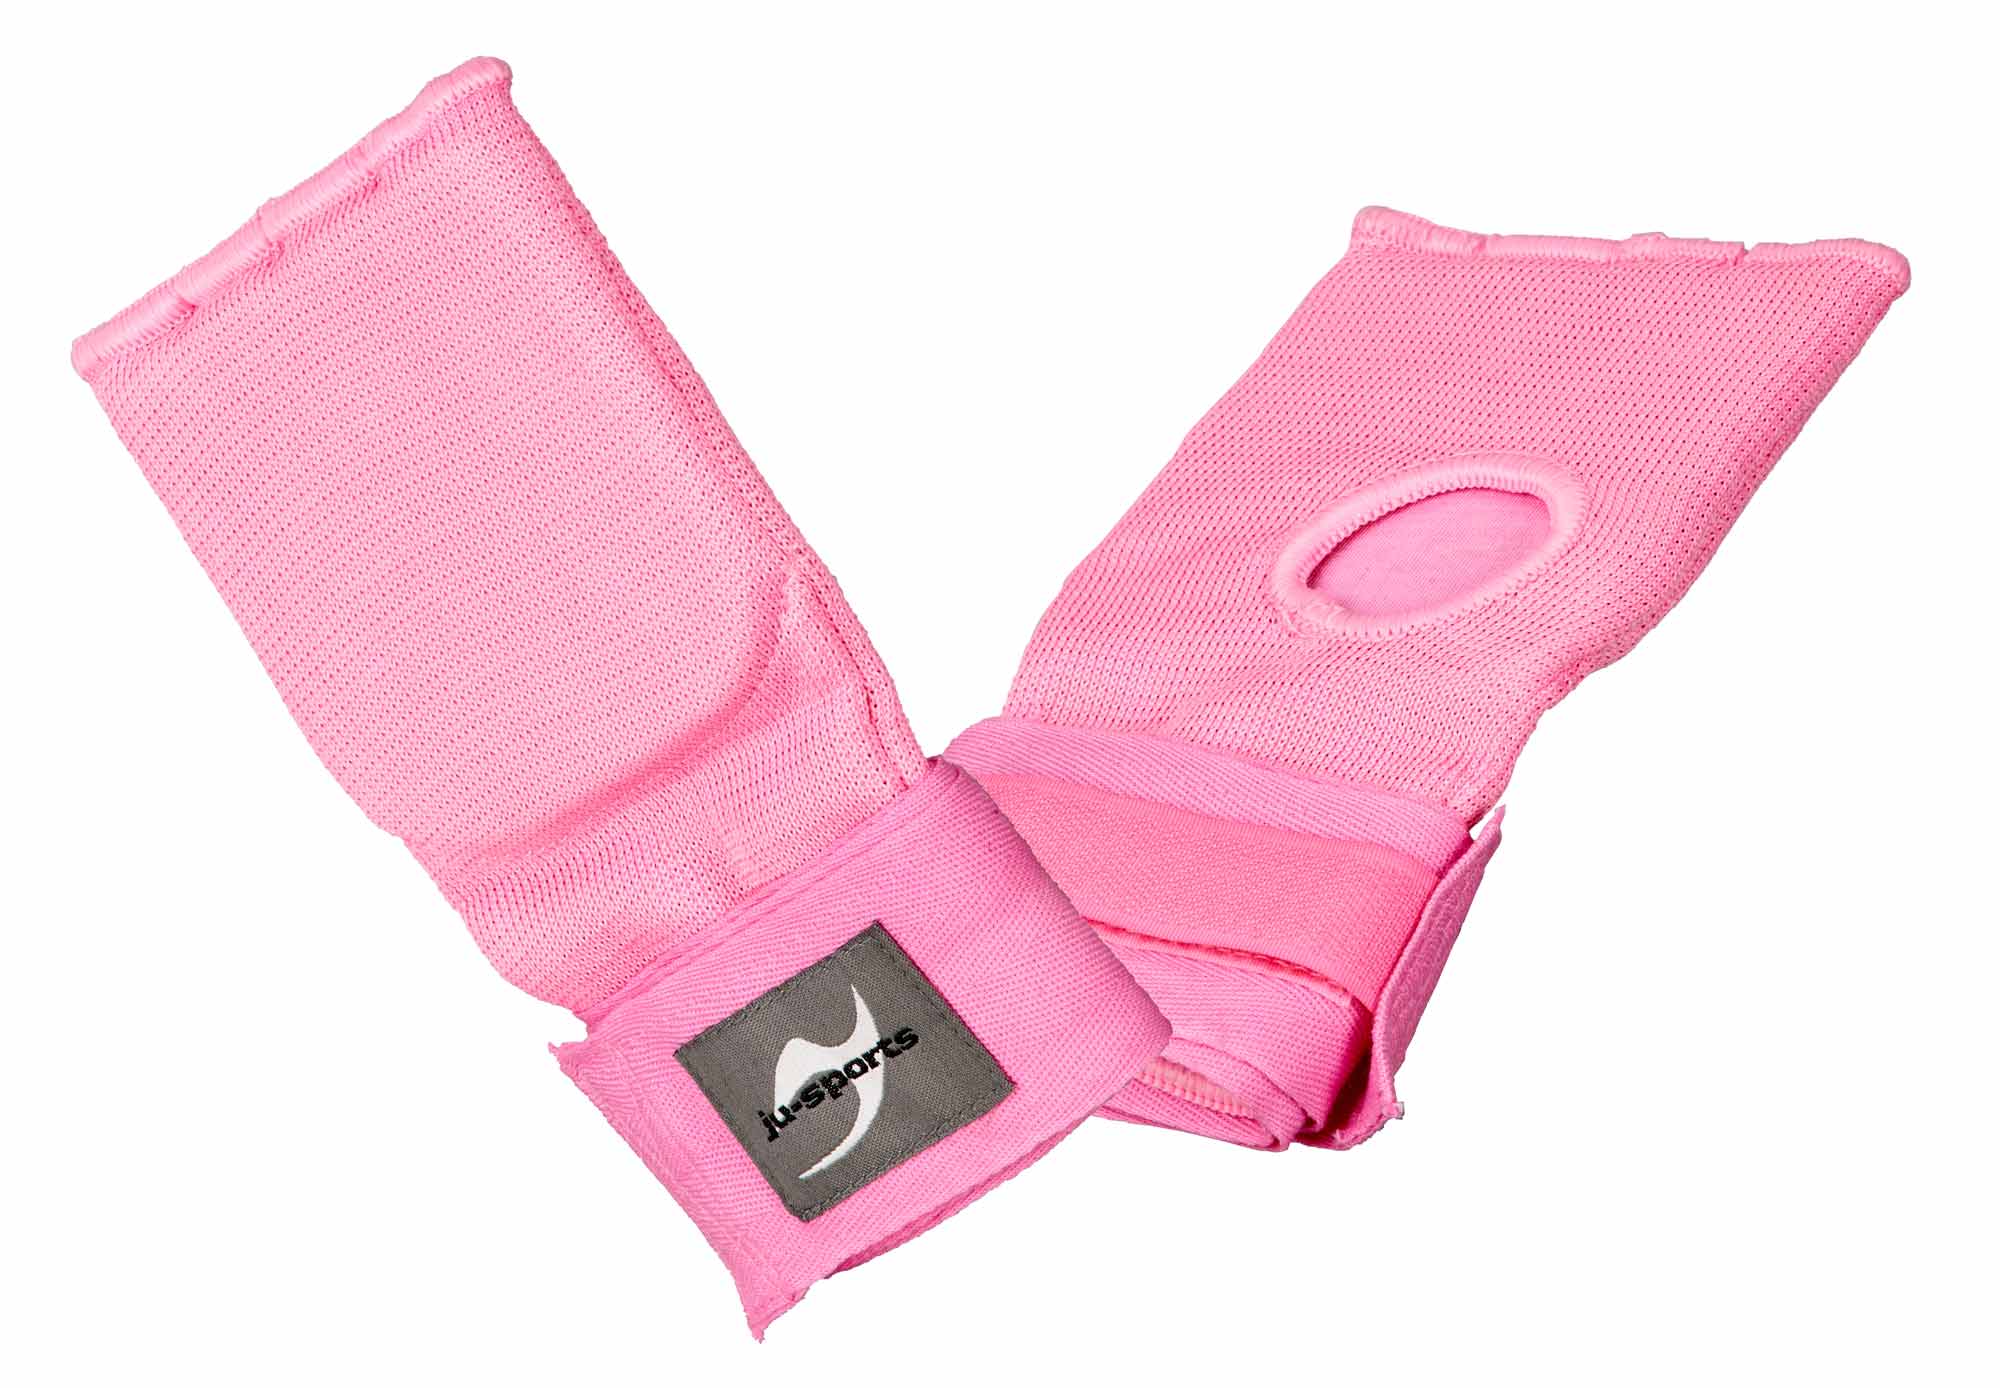 Ju-Sports Inner Gloves with Wraps pink